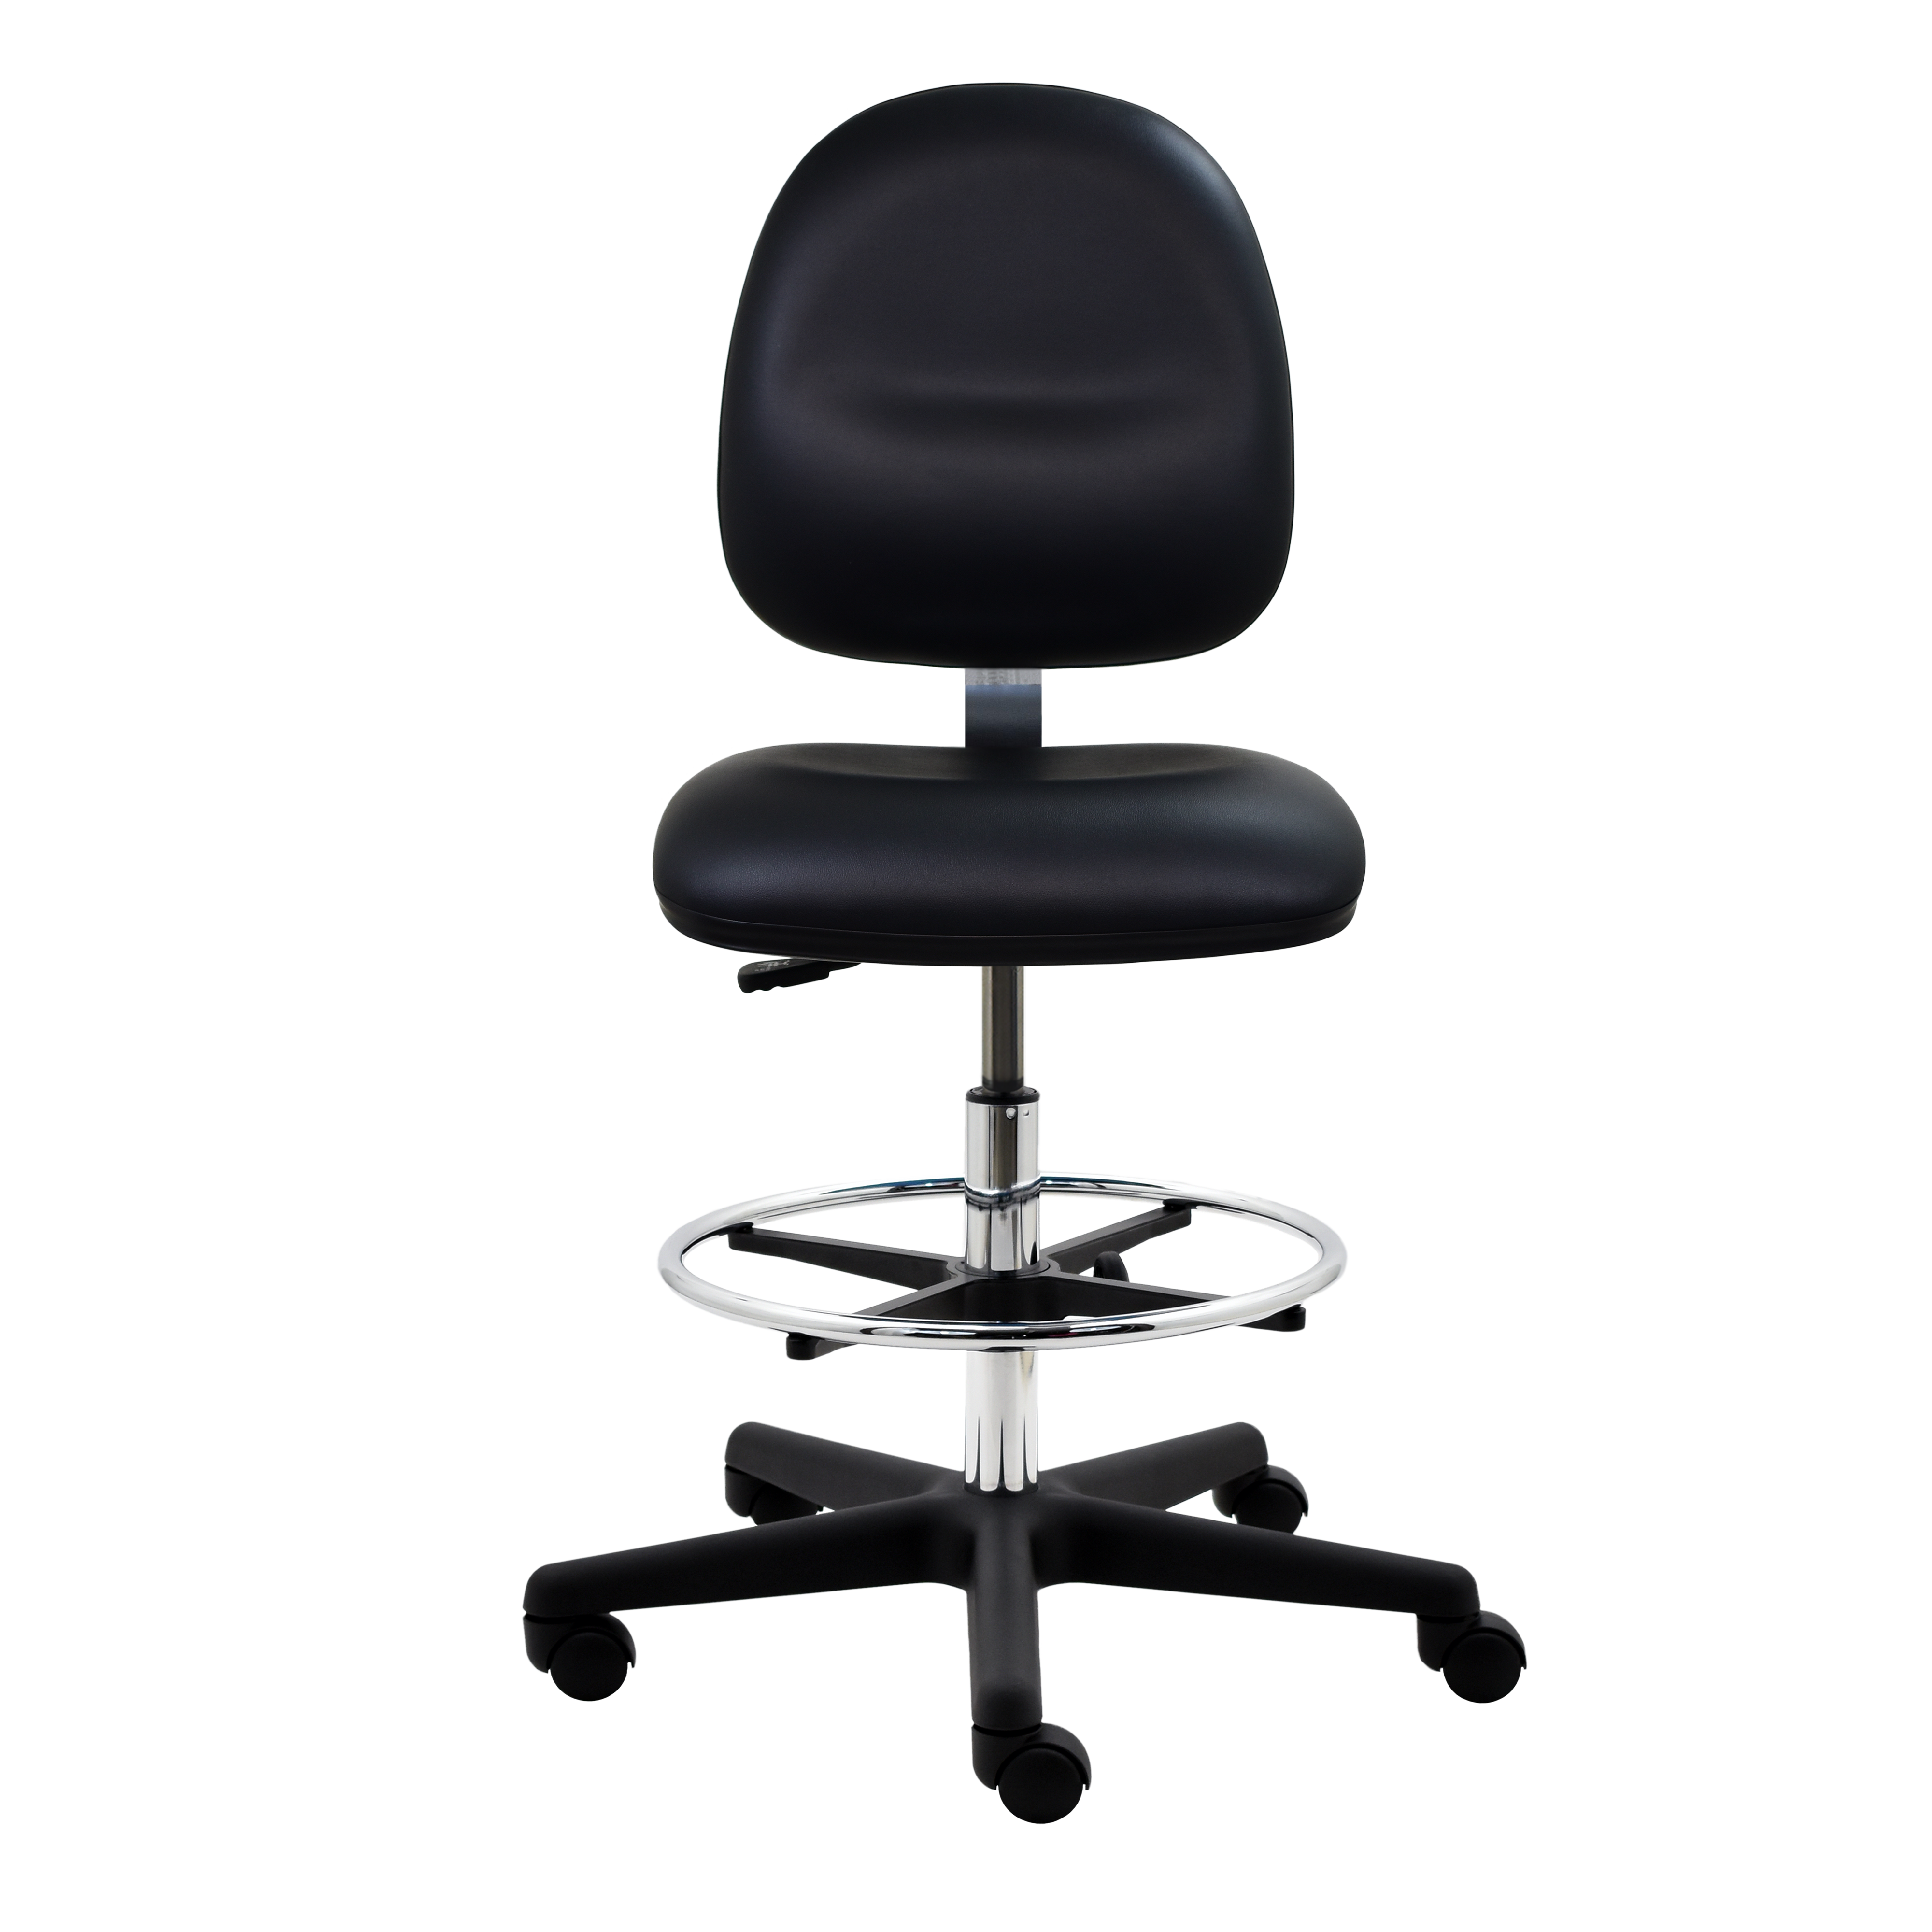 Bench Height Vinyl Clean Room Chair PM20S-VCR